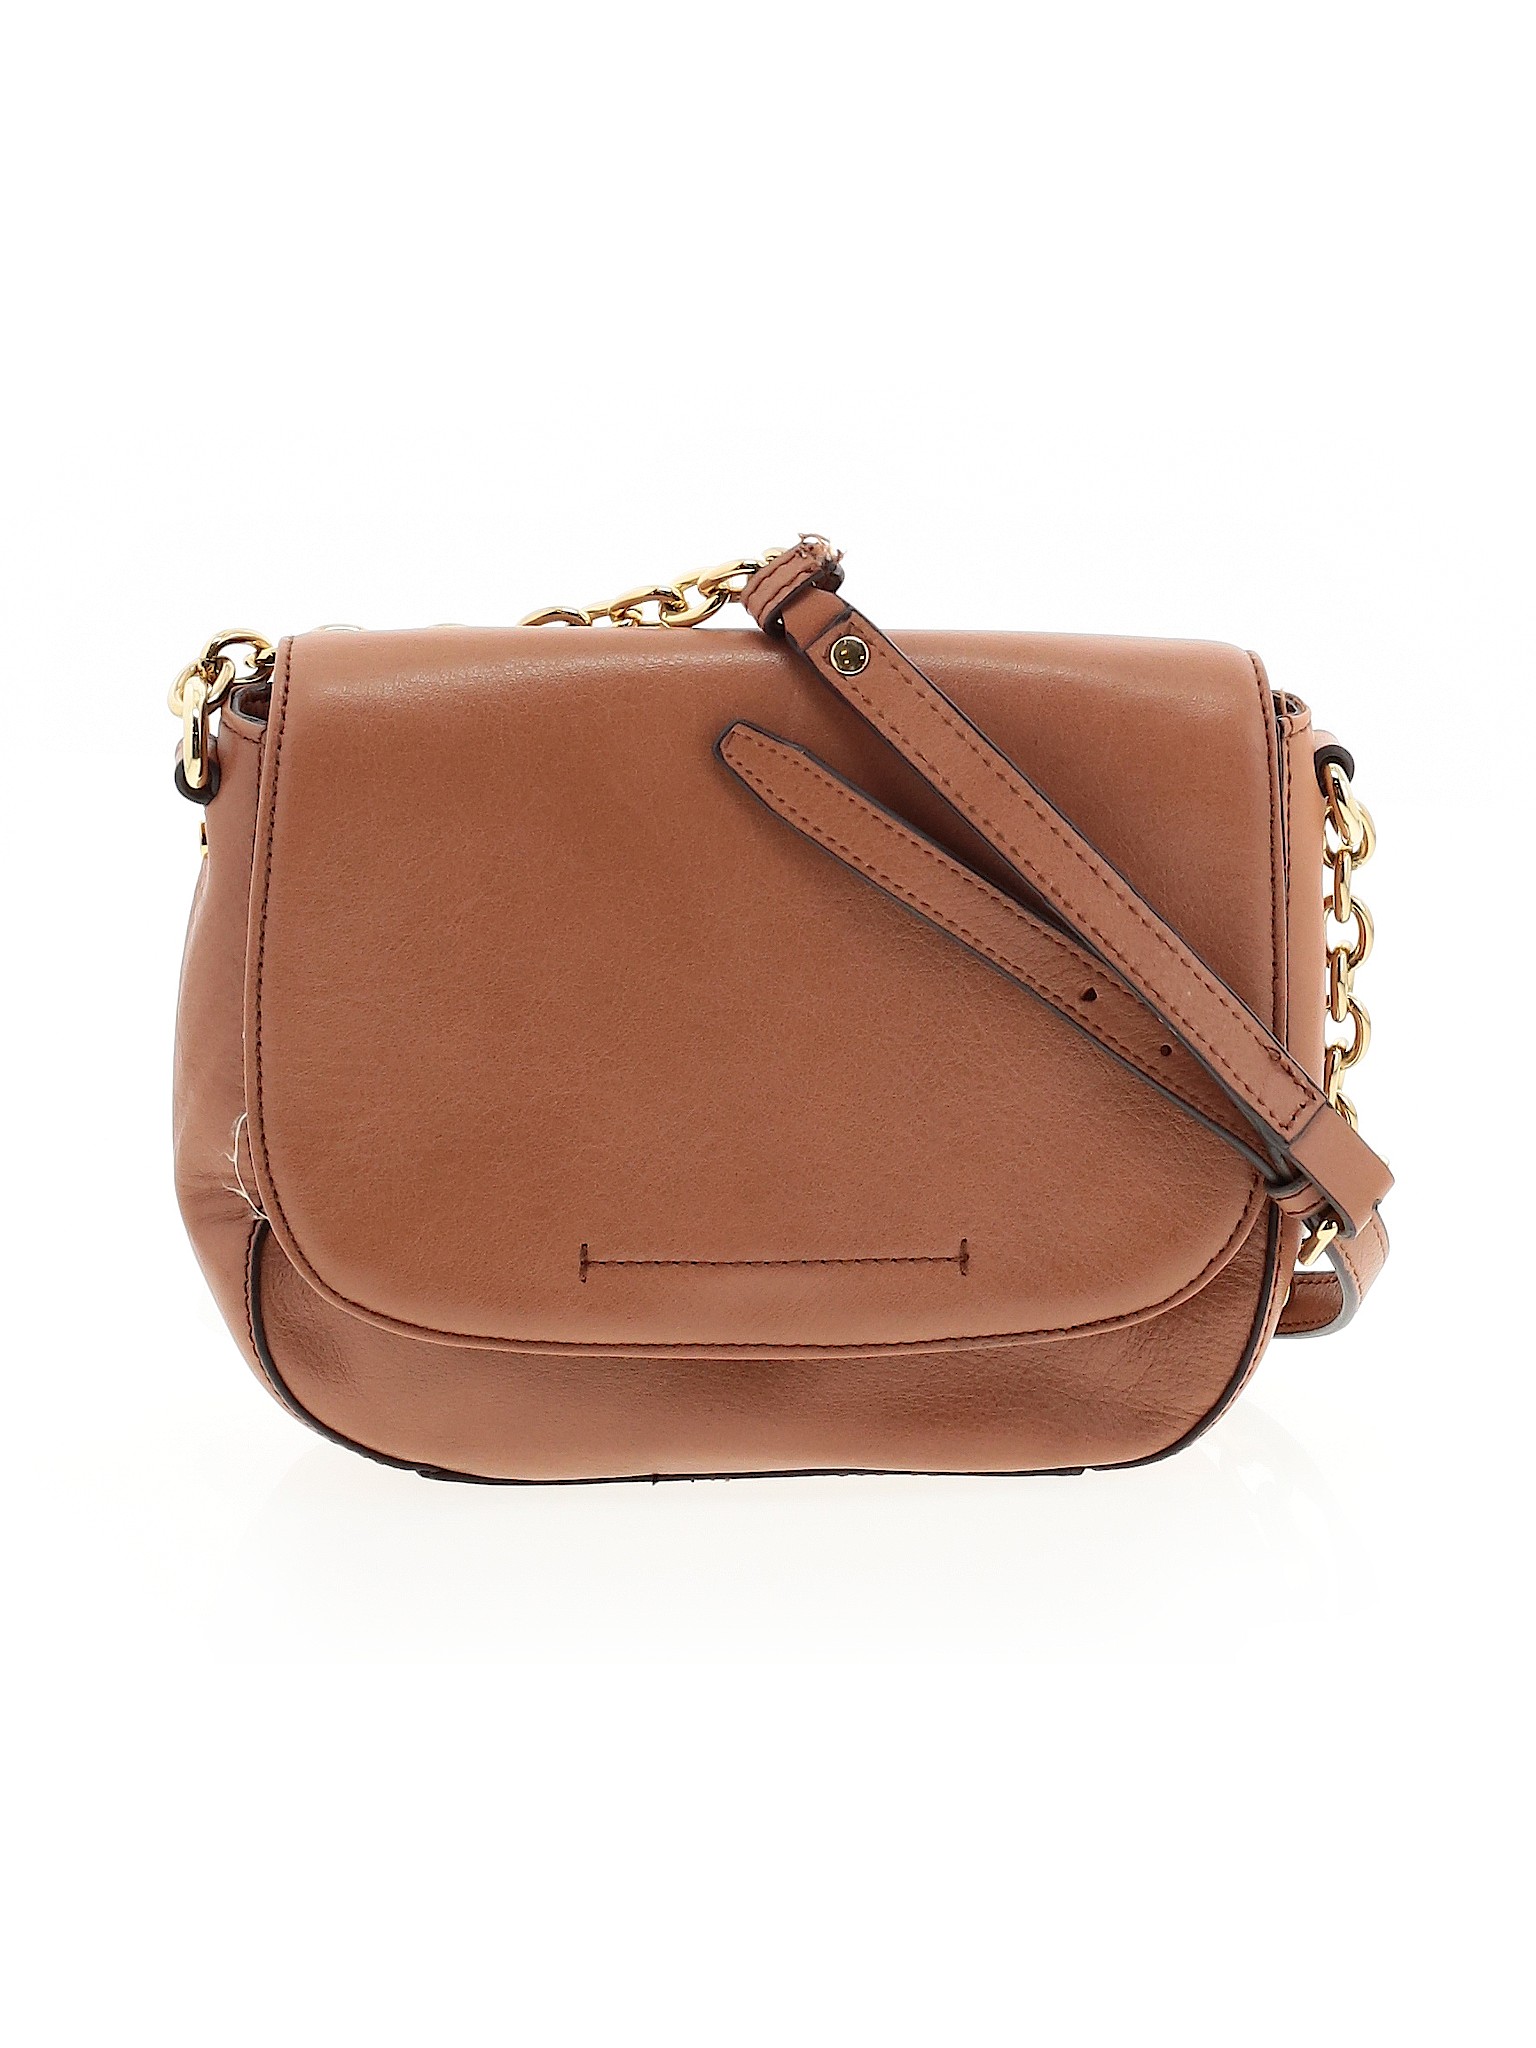 Banana Republic 100% Leather Solid Tan Leather Crossbody Bag One Size ...